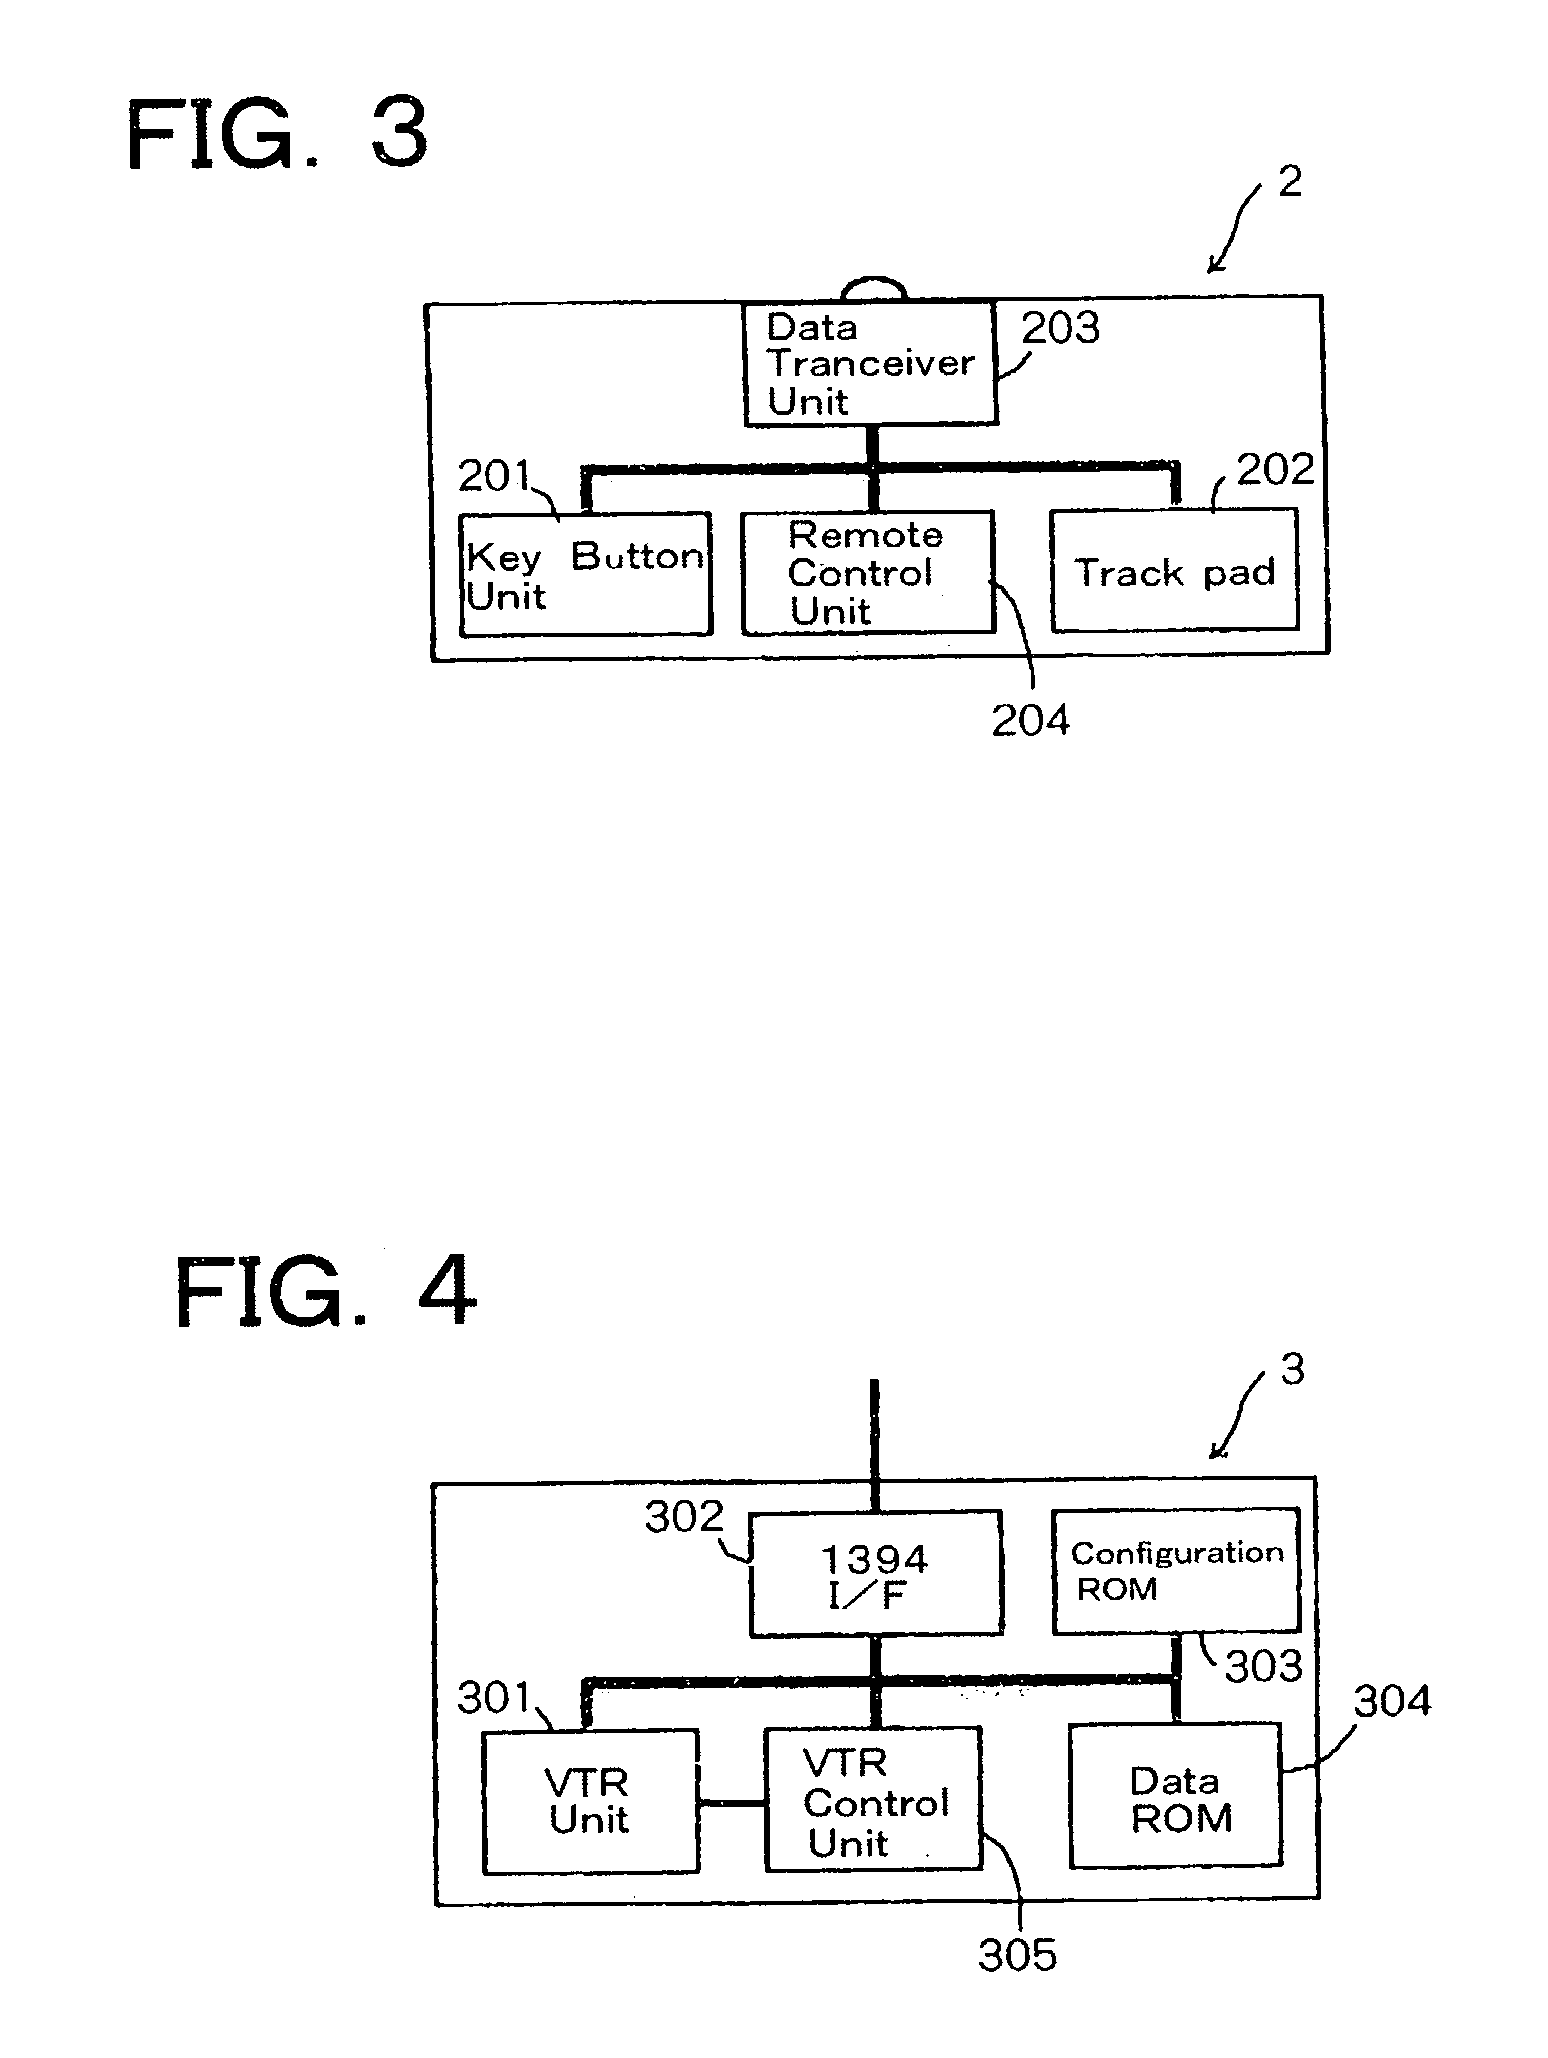 Display apparatus having a remote control device with a track pad unit